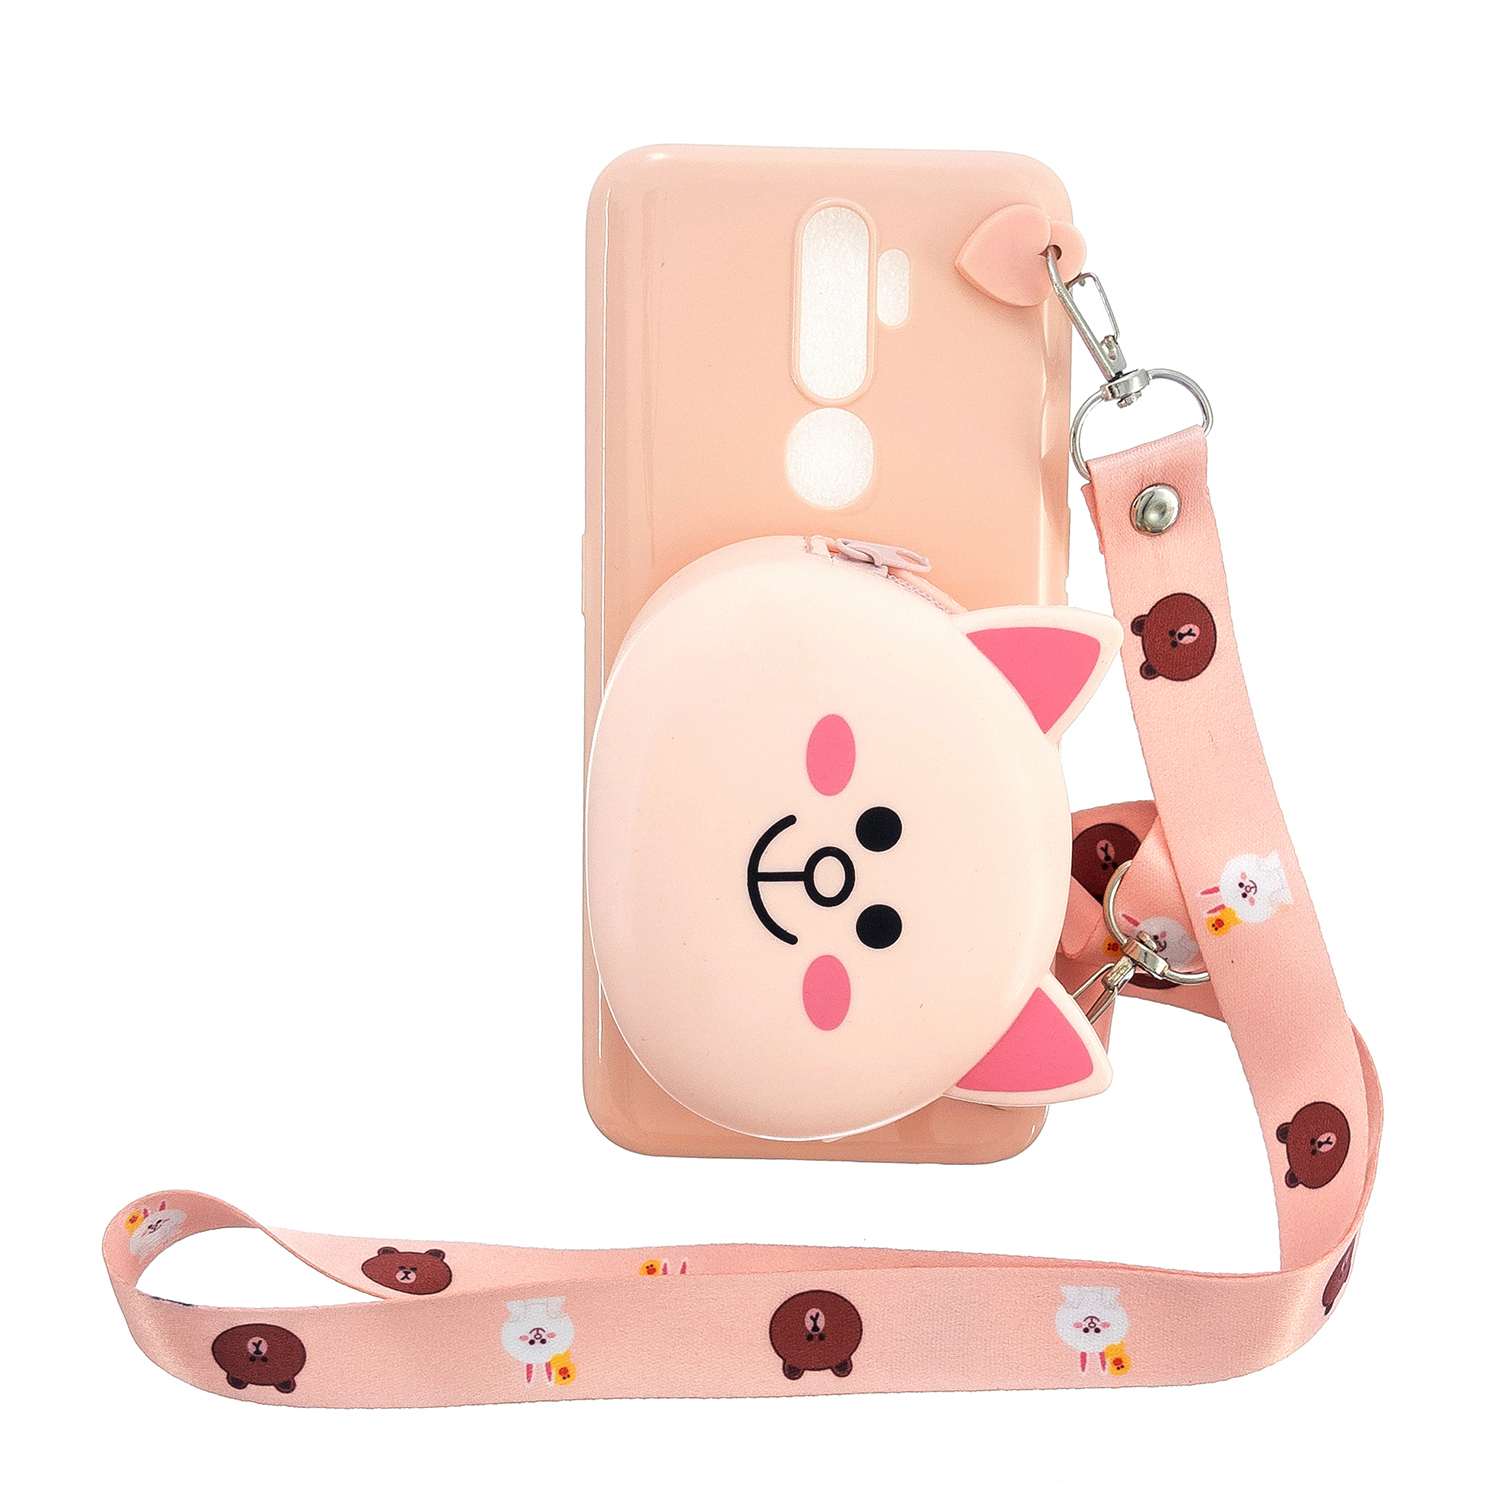 For OPPO A83/A9 2020 Cellphone Case Mobile Phone TPU Shell Shockproof Cover with Cartoon Cat Pig Panda Coin Purse Lovely Shoulder Starp  Pink